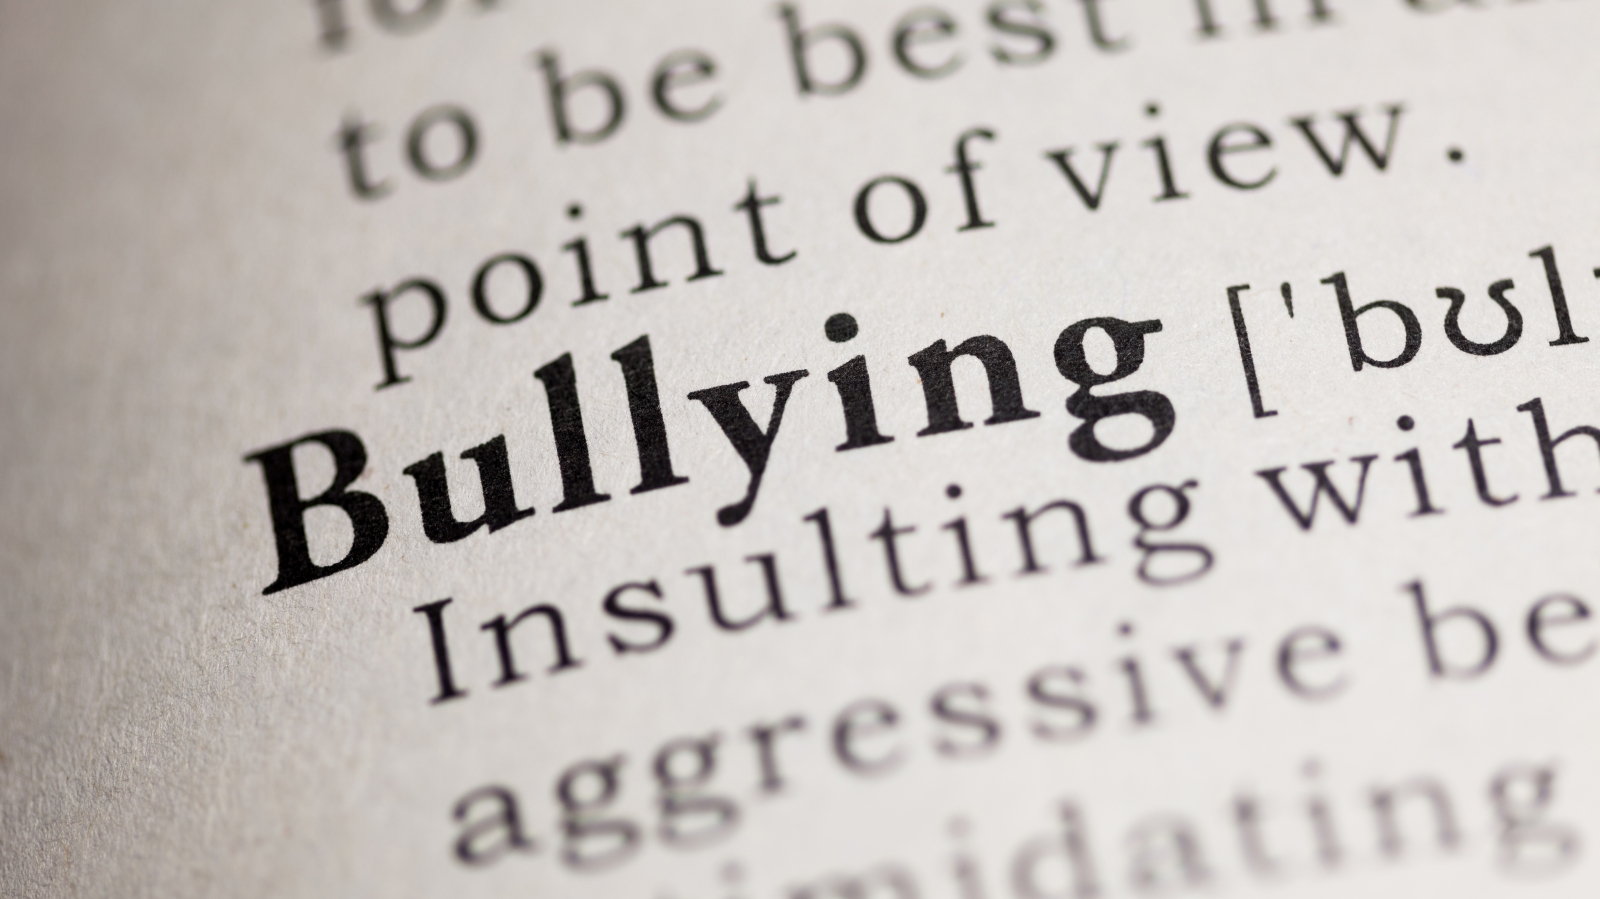 Voter preference for Trump linked to bullying in middle schools